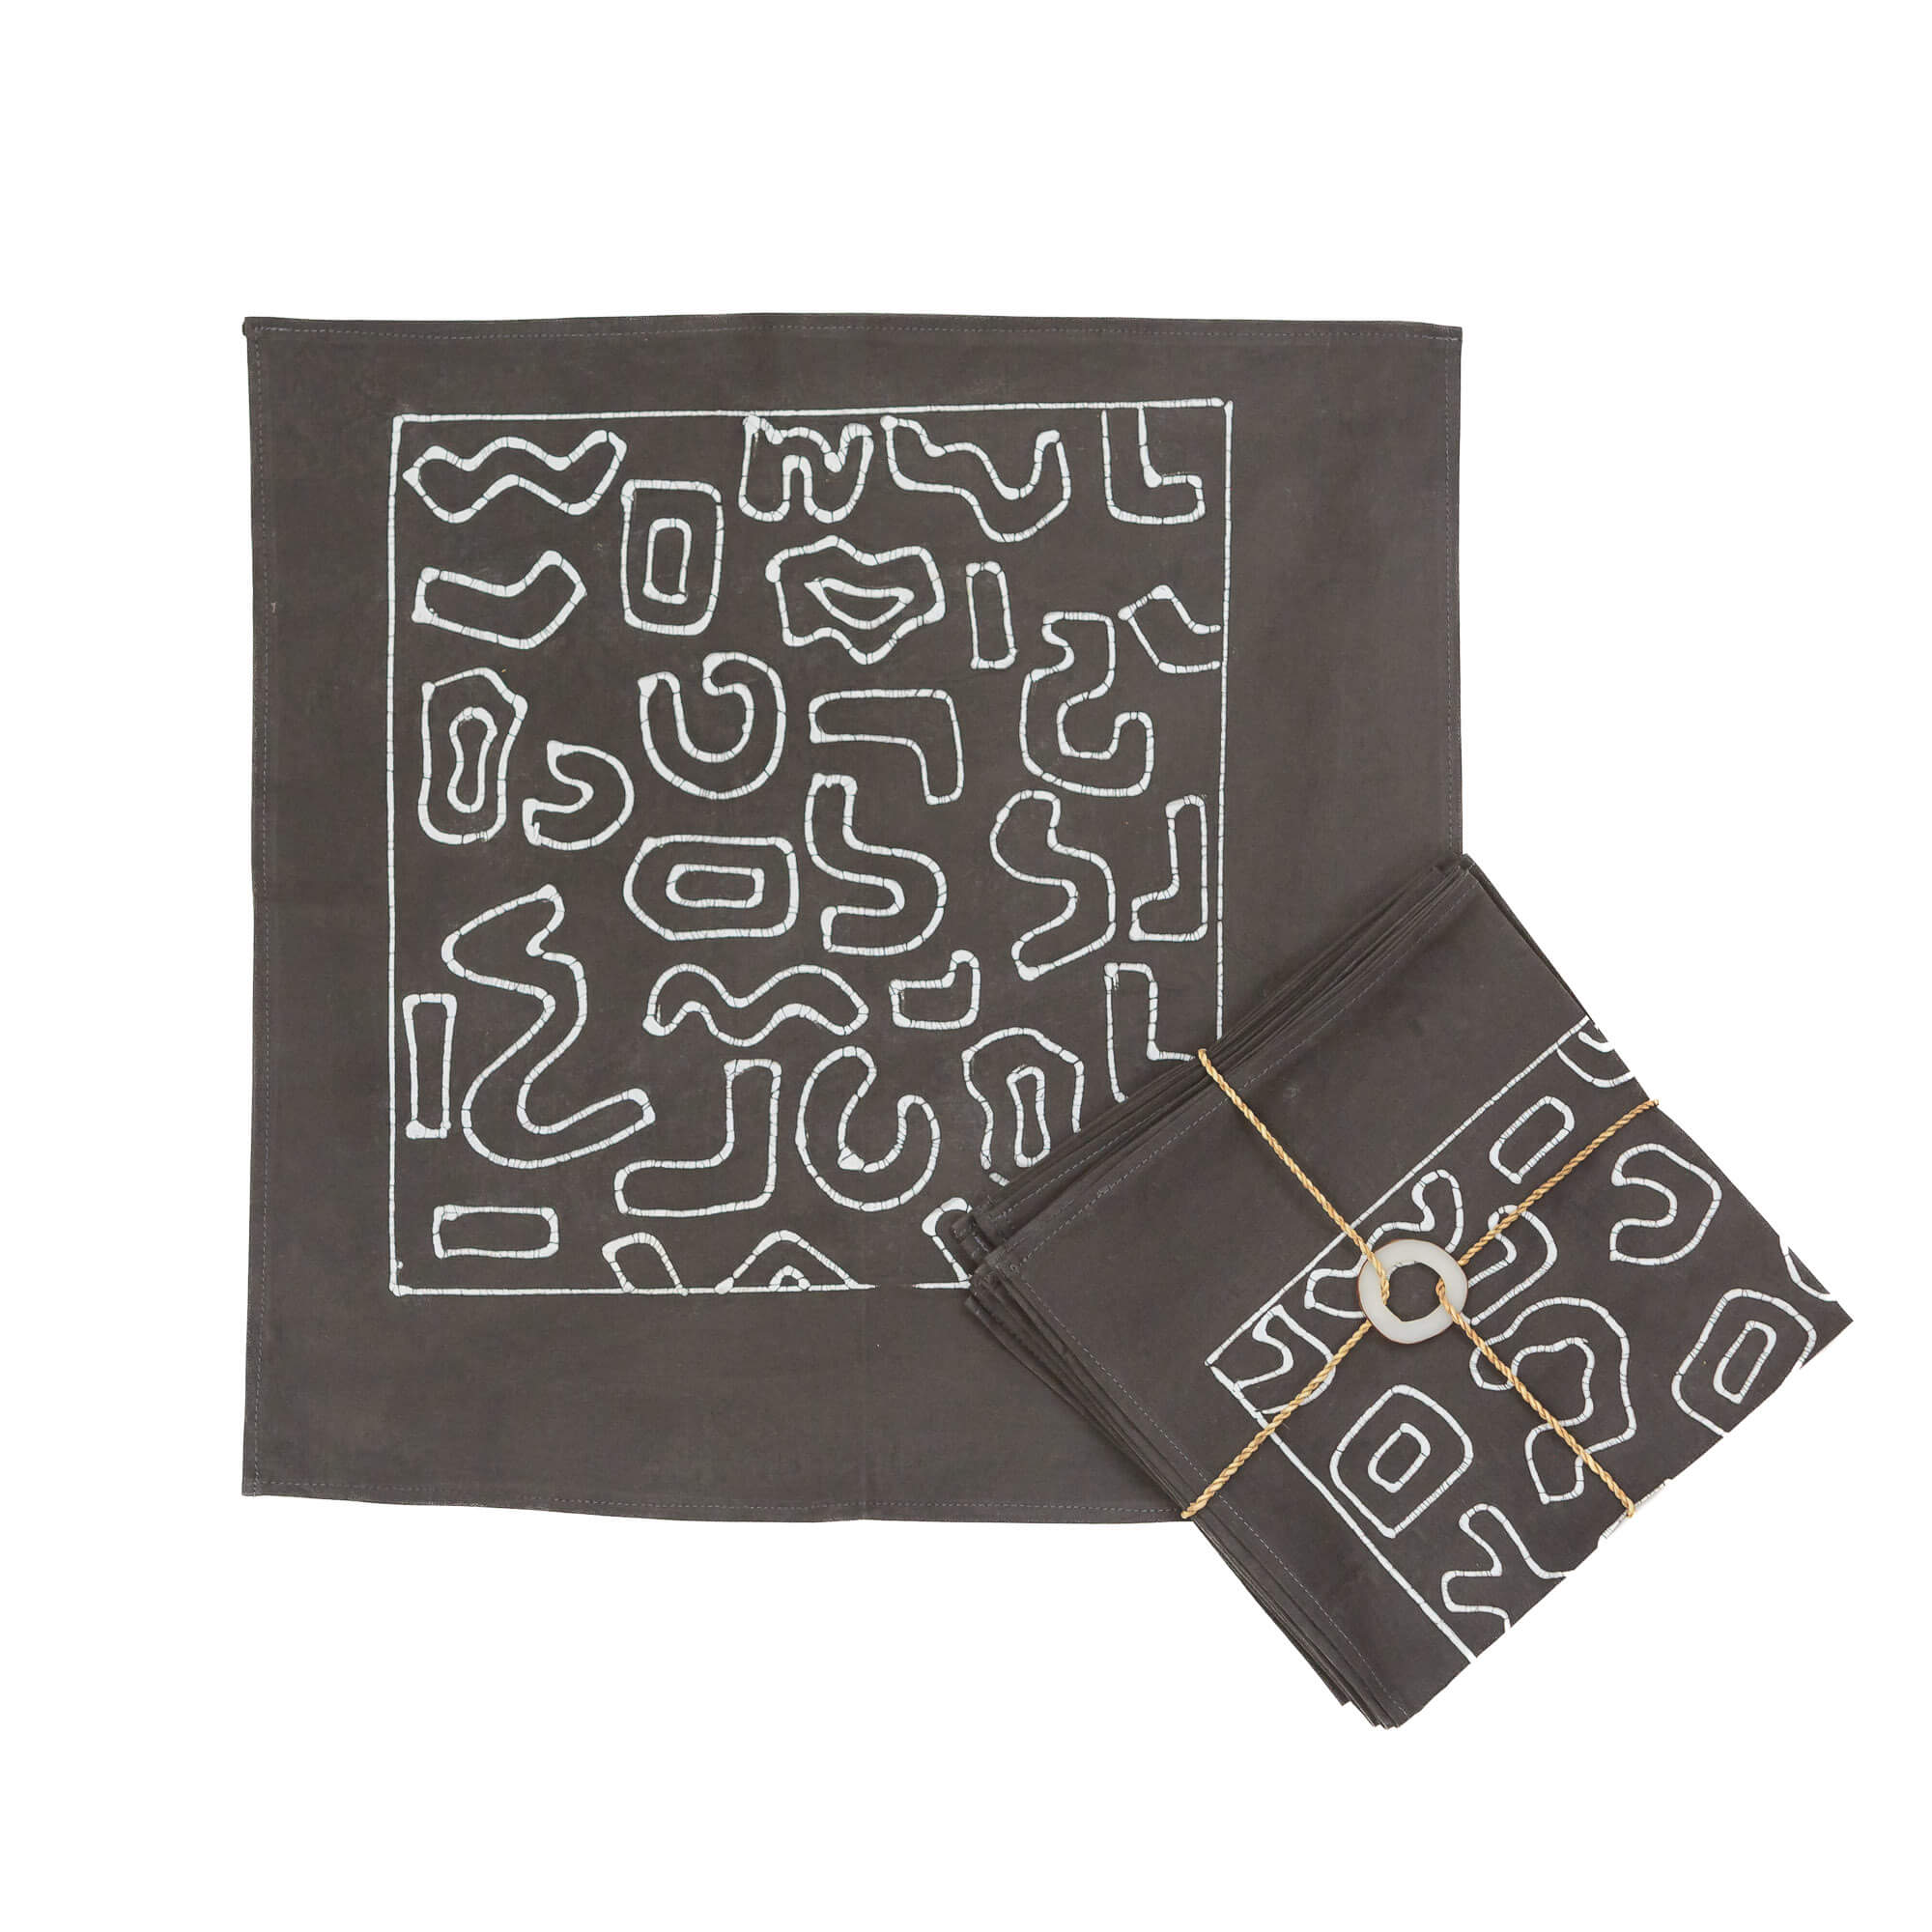 Kuba Charcoal Outline Napkin Set - Handmade by TRIBAL TEXTILES - Handcrafted Home Decor Interiors - African Made